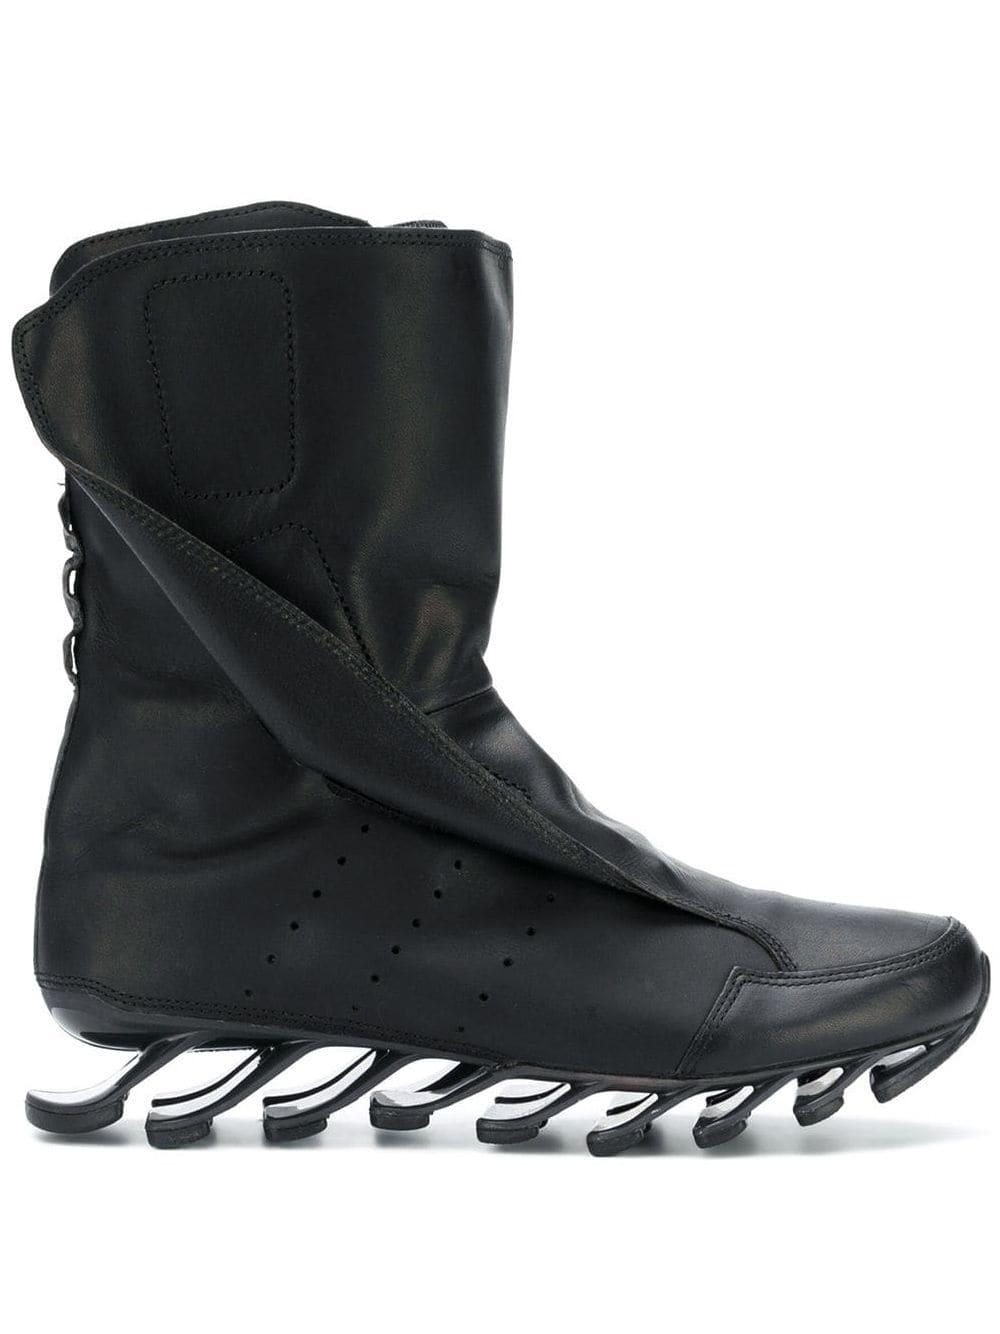 Rick Owens Leather Abstract Sole Boots in Black for Men - Lyst